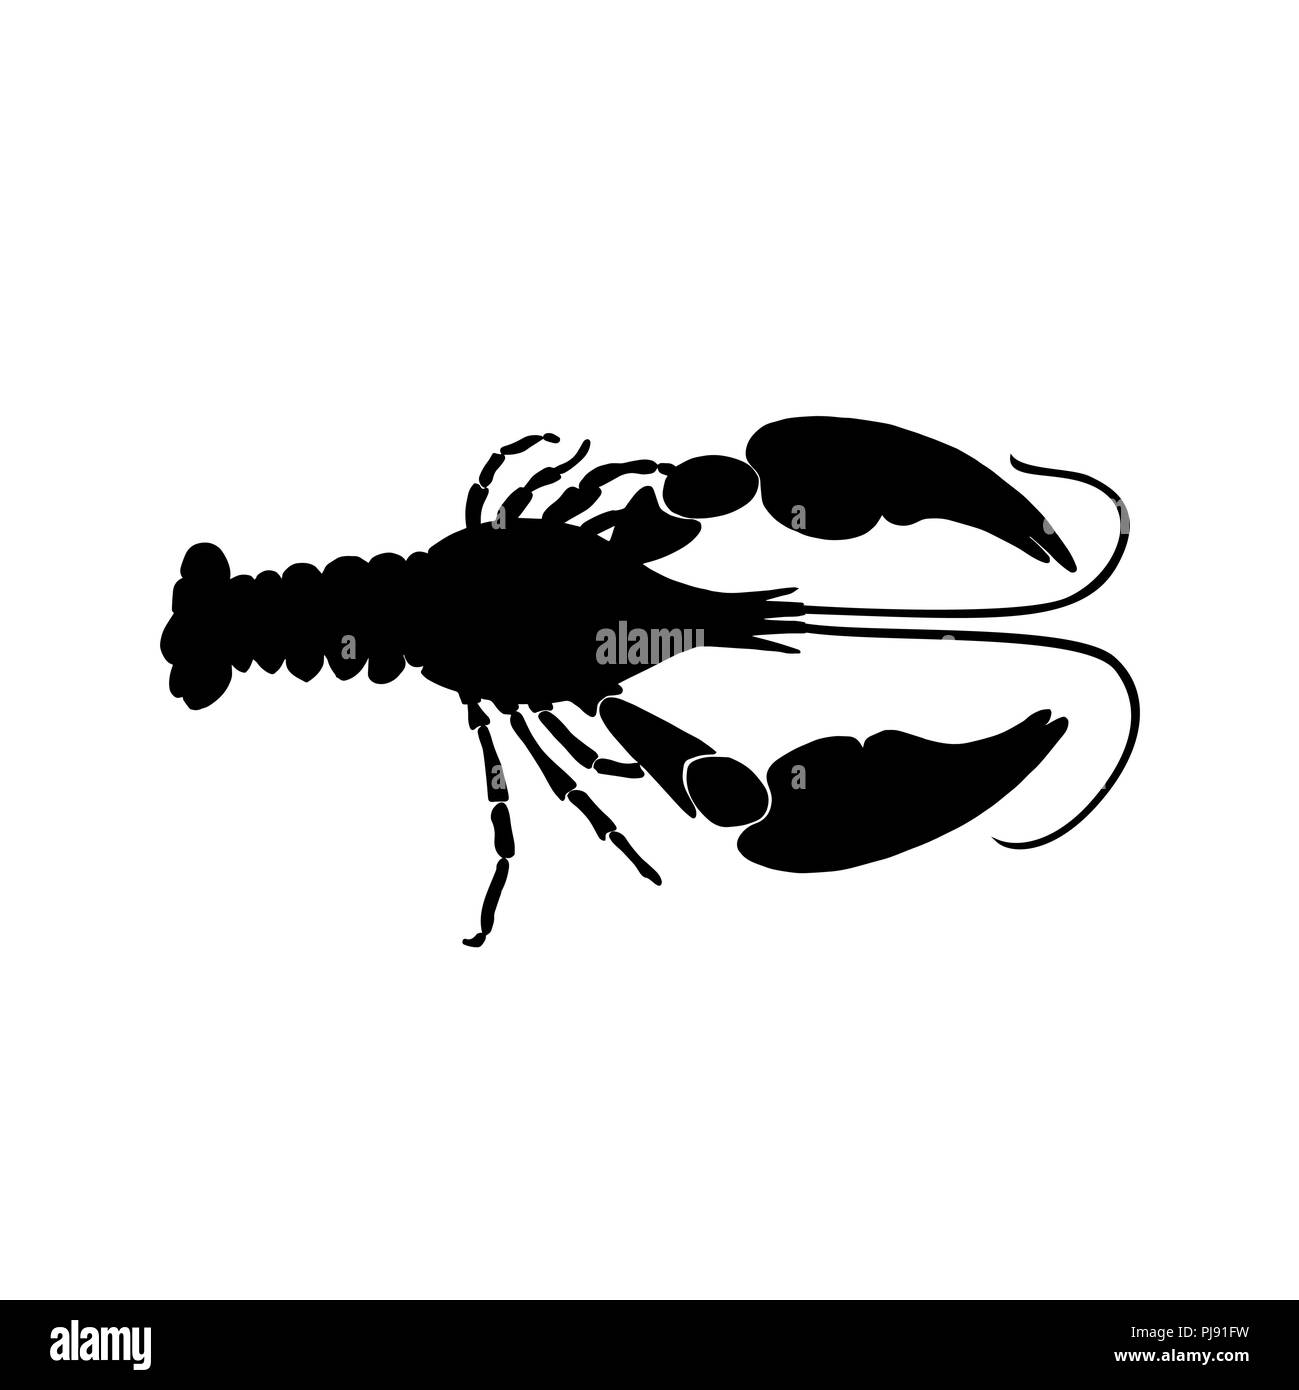 Vector illustration of black crawfish silhouette on white background. Cancer silhouette Stock Vector